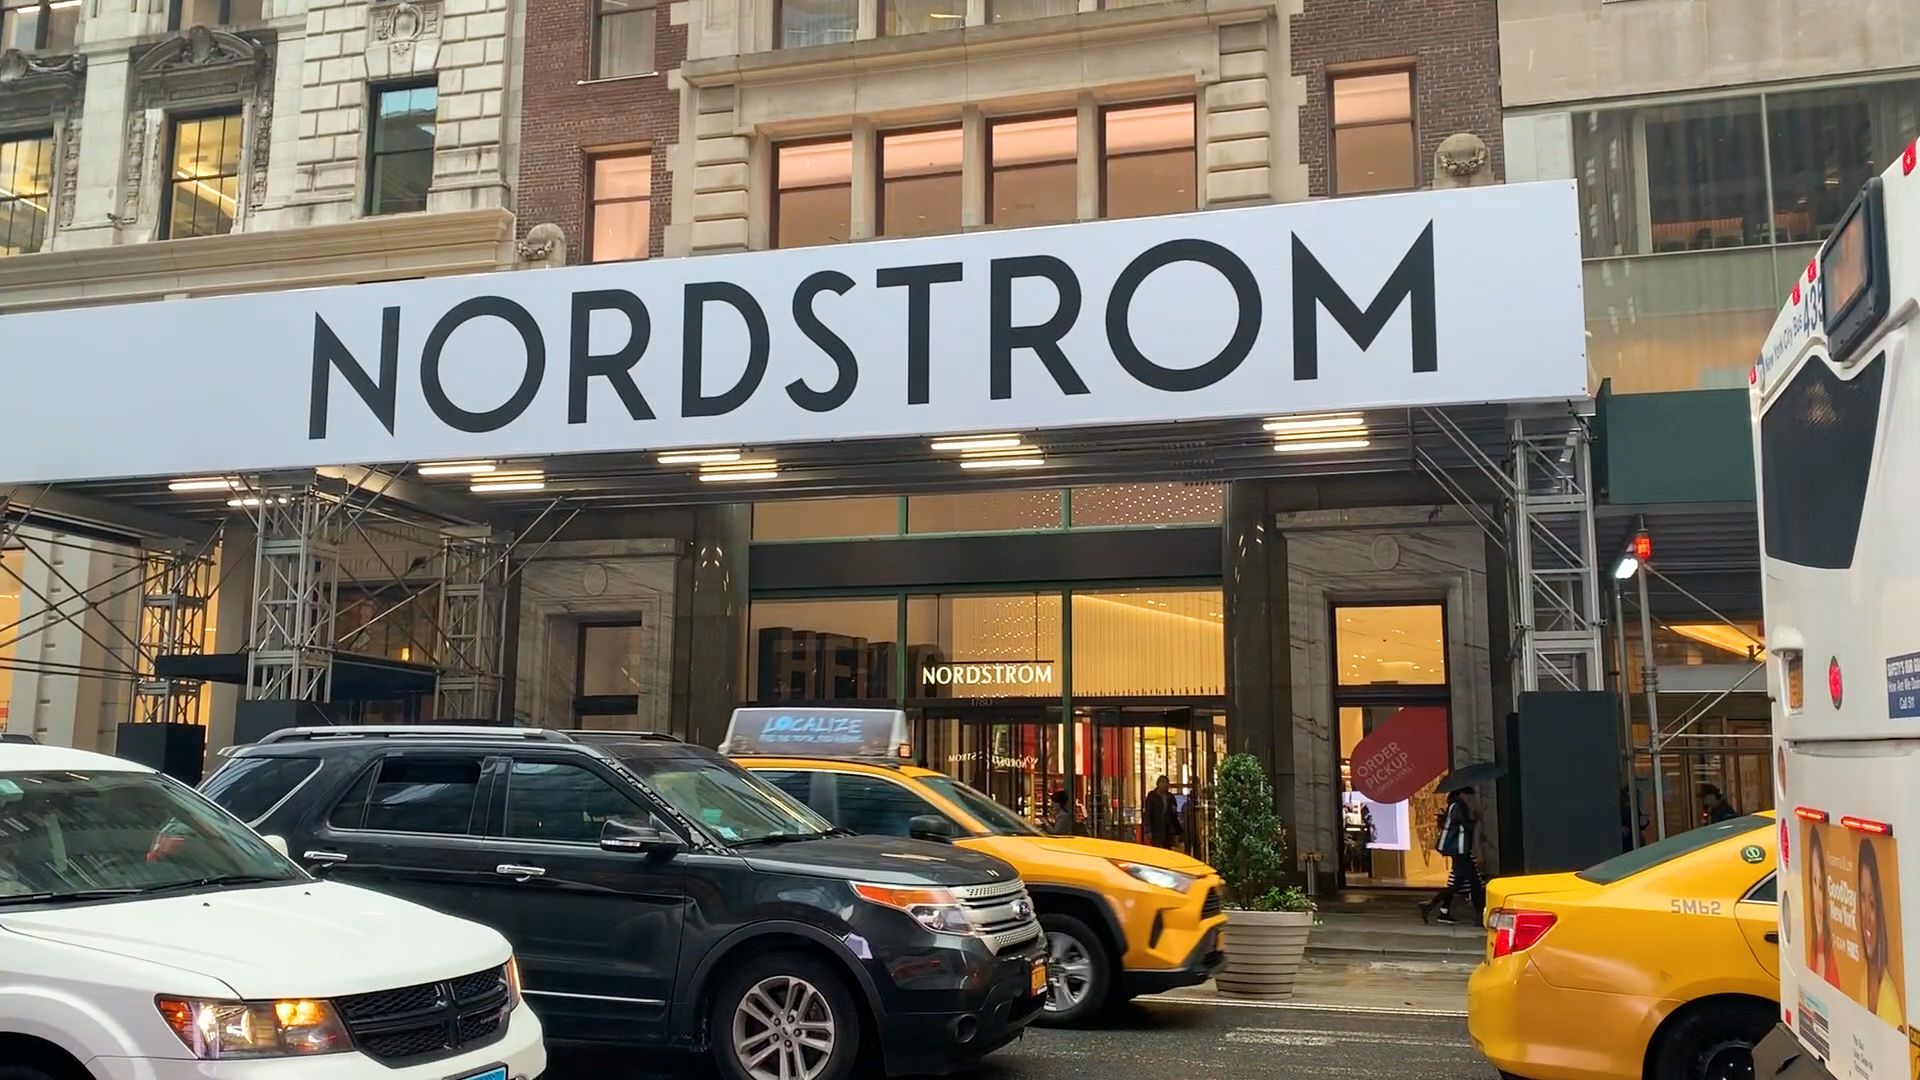 Nordstrom Now Sells Home Goods at Its New York Store - The New York Times